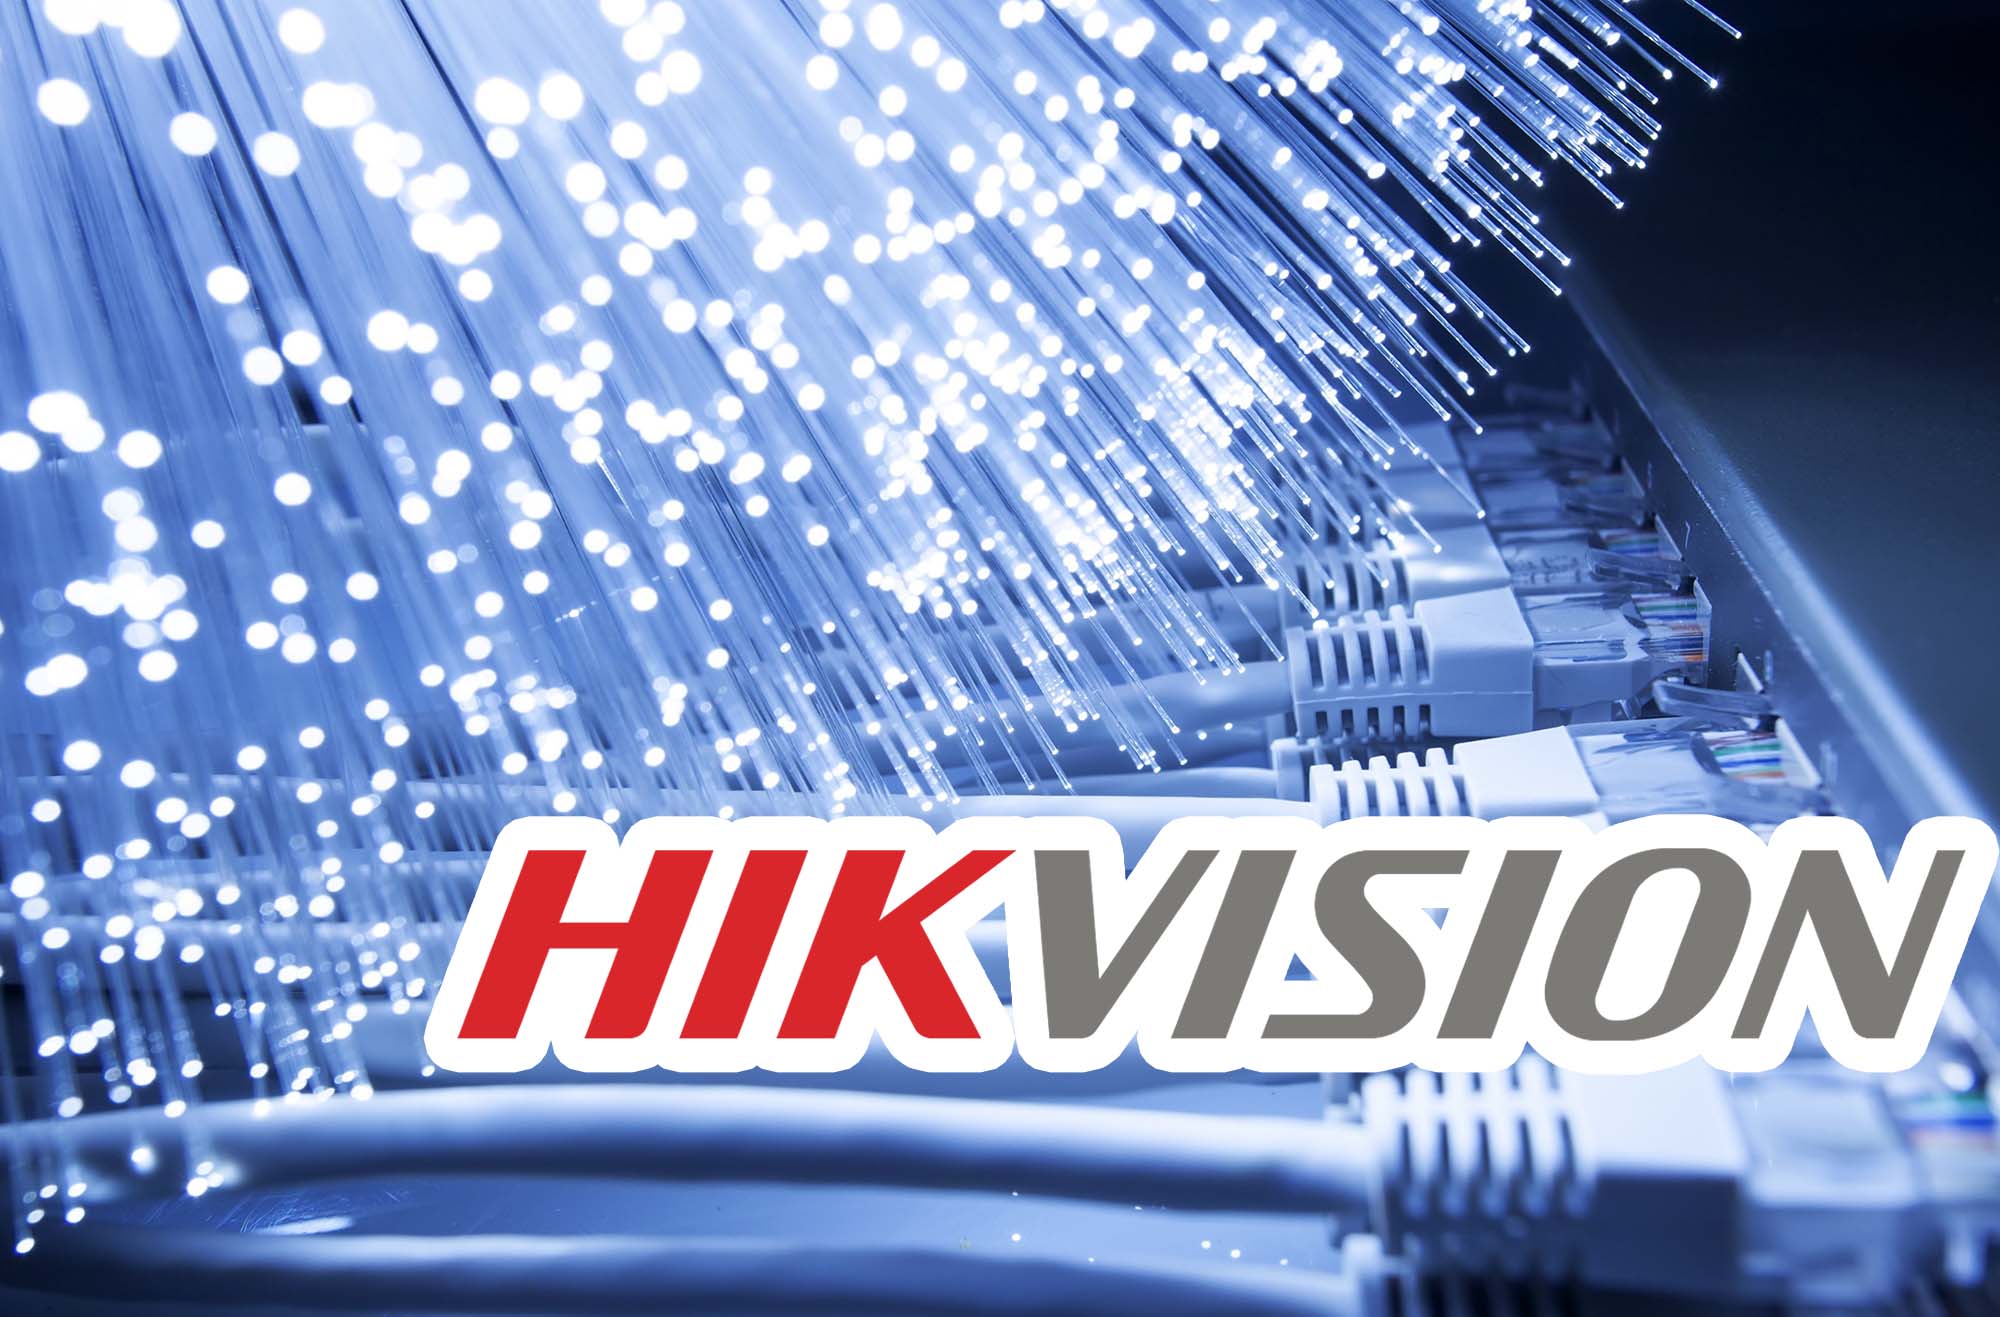 Hikvision IP Camera RJ45 Pin-Out (wiring ... cctv wiring guide 